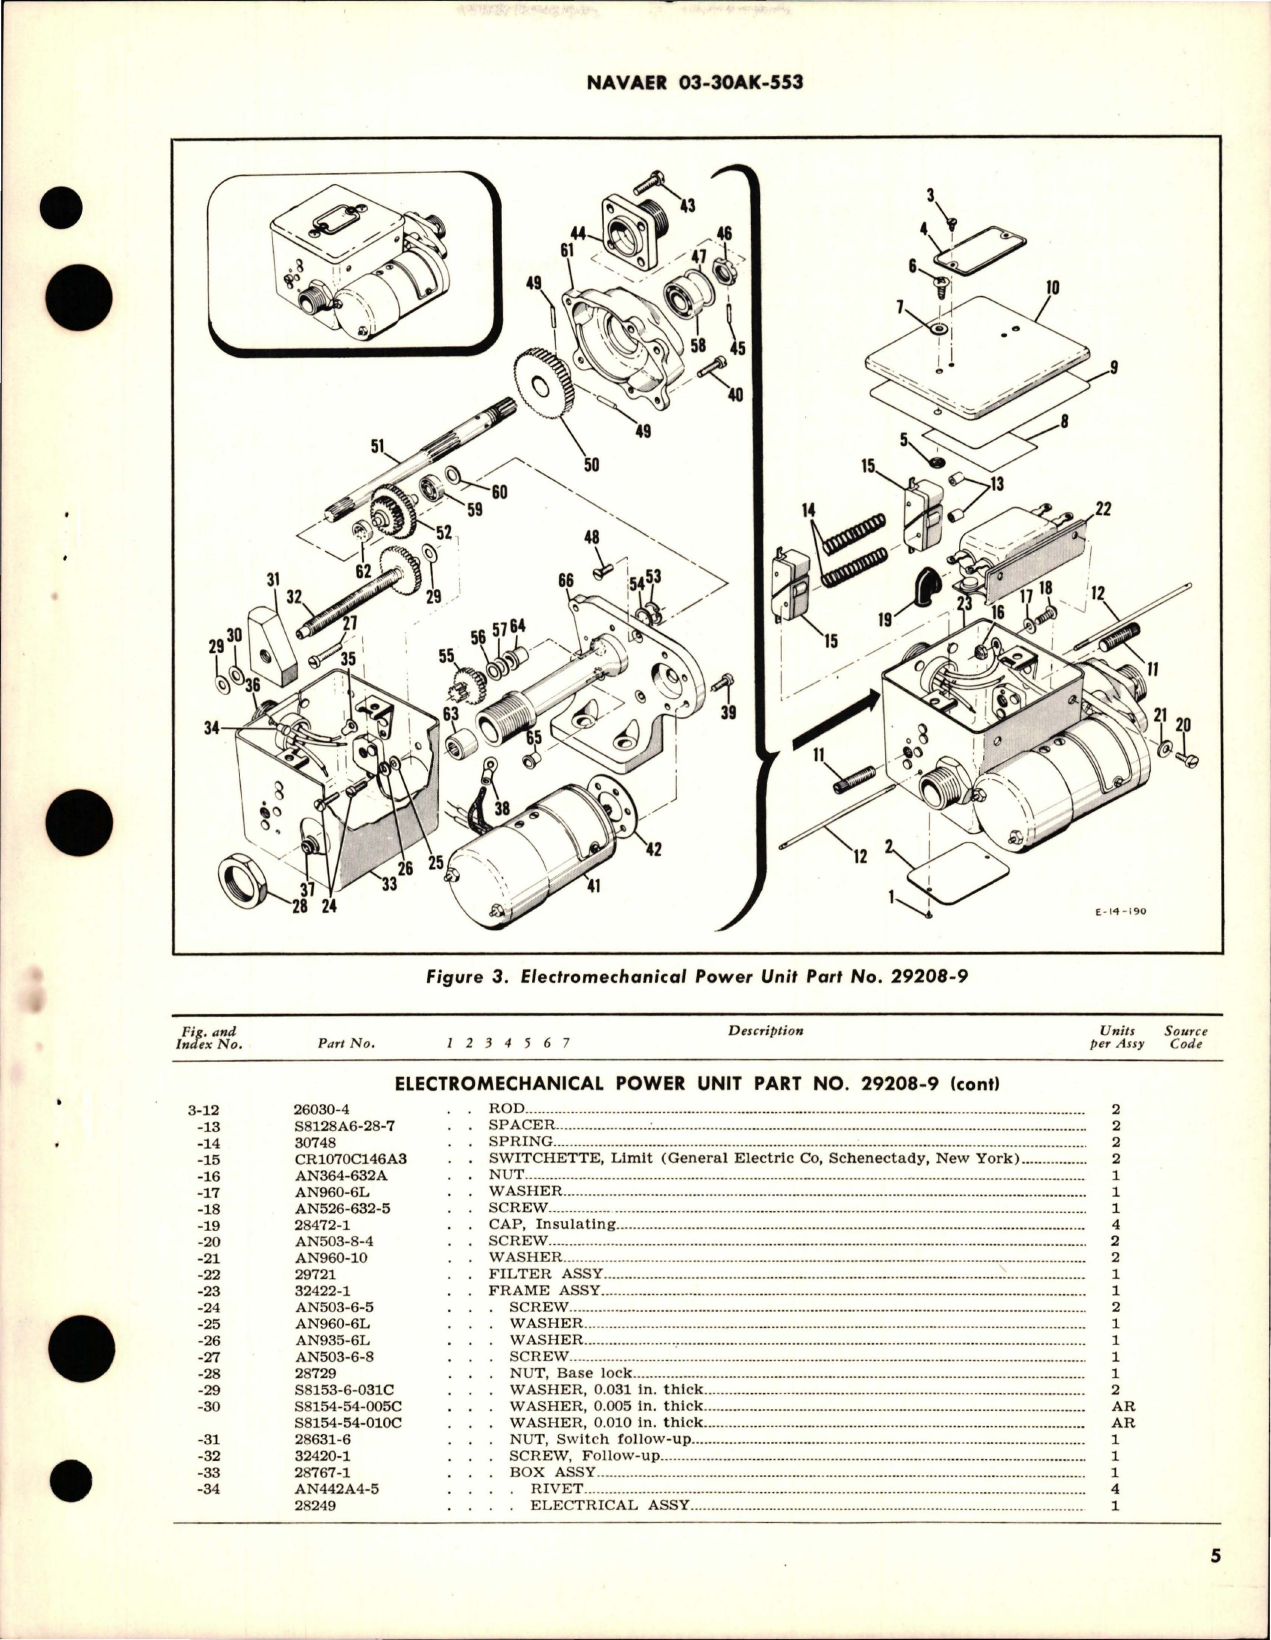 Sample page 5 from AirCorps Library document: Overhaul Instructions with Parts Breakdown for Electromechanical Power Unit - 29208-9 